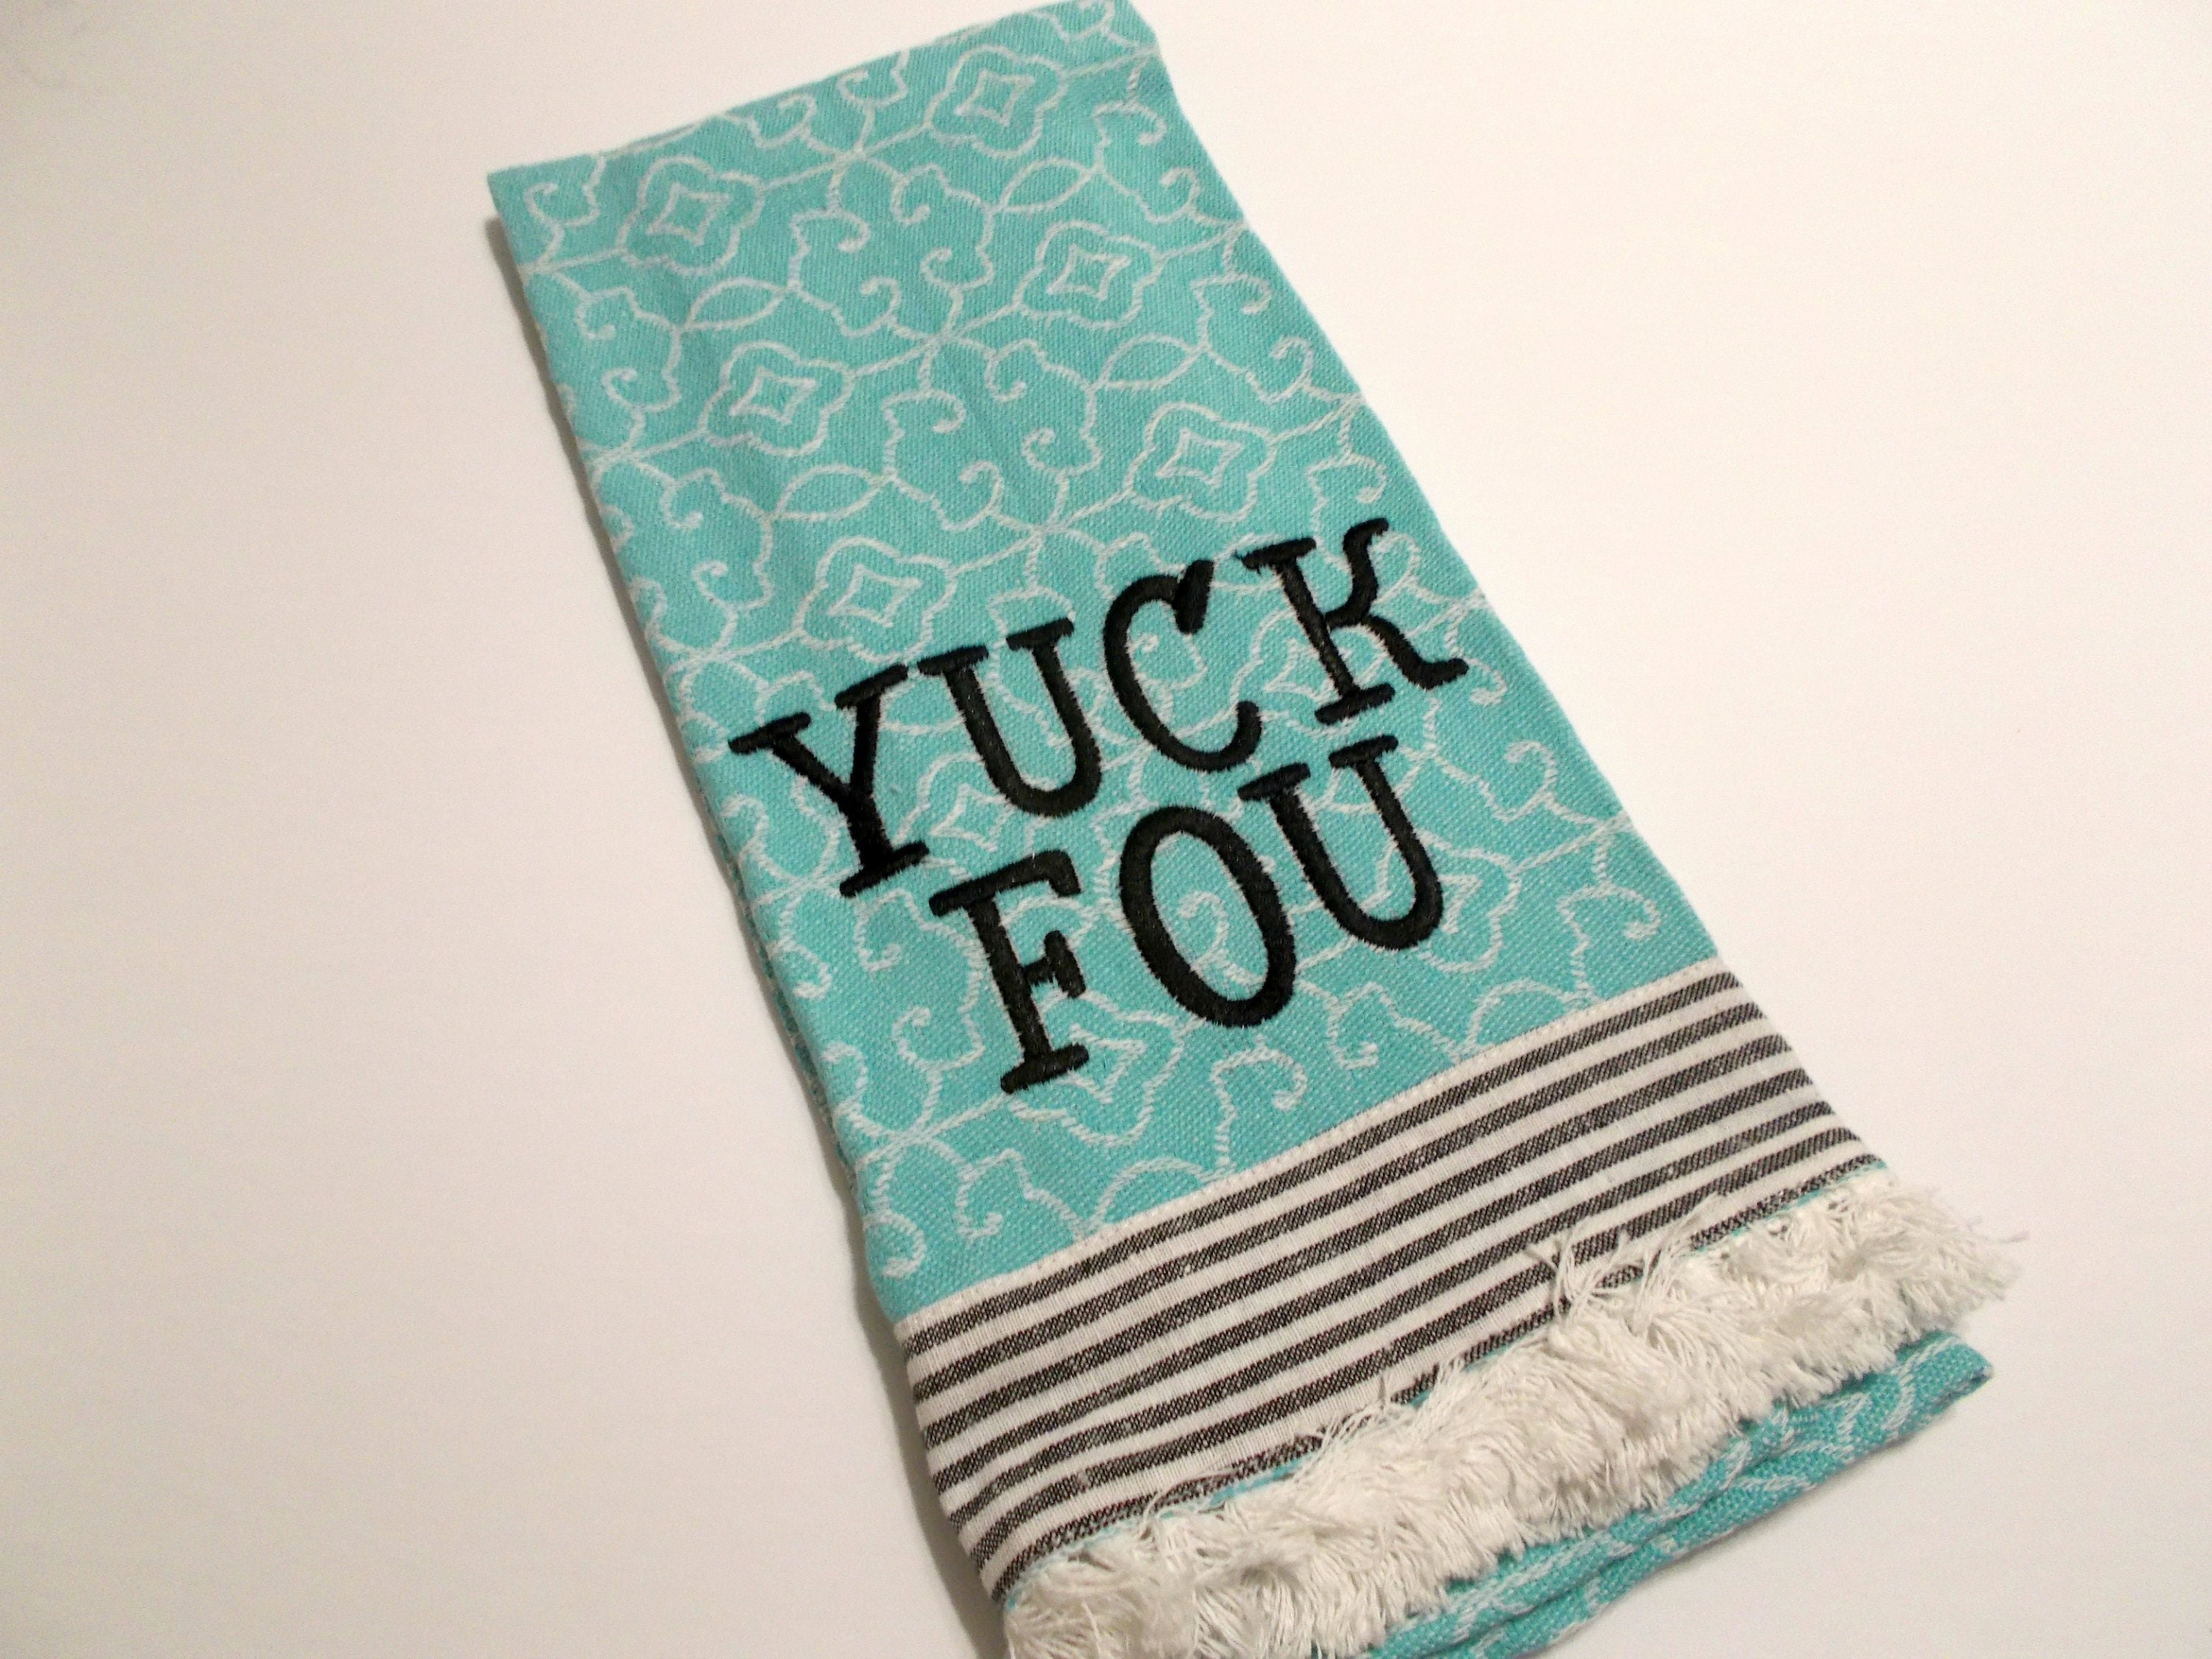 Yuck Fou - Funny Towel - F Word - Funny Cuss Word - Curse Word - Ten Dollar  Gift - Inappropriate kitchen Towel - Embroidered Kitchen Towel